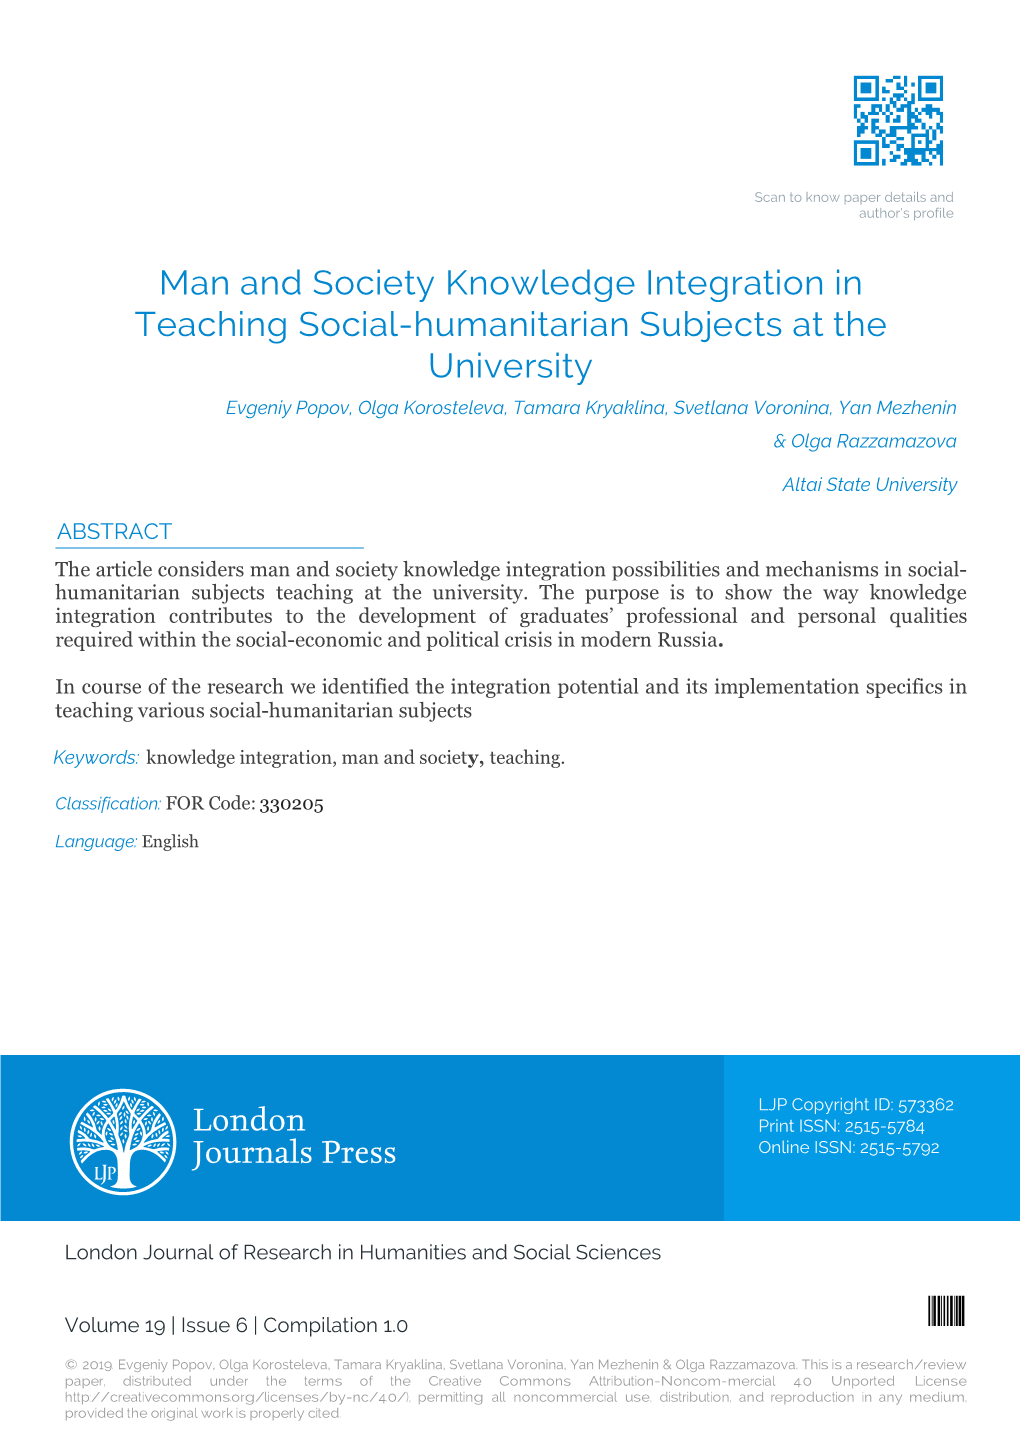 Man and Society Knowledge Integration in Teaching Social